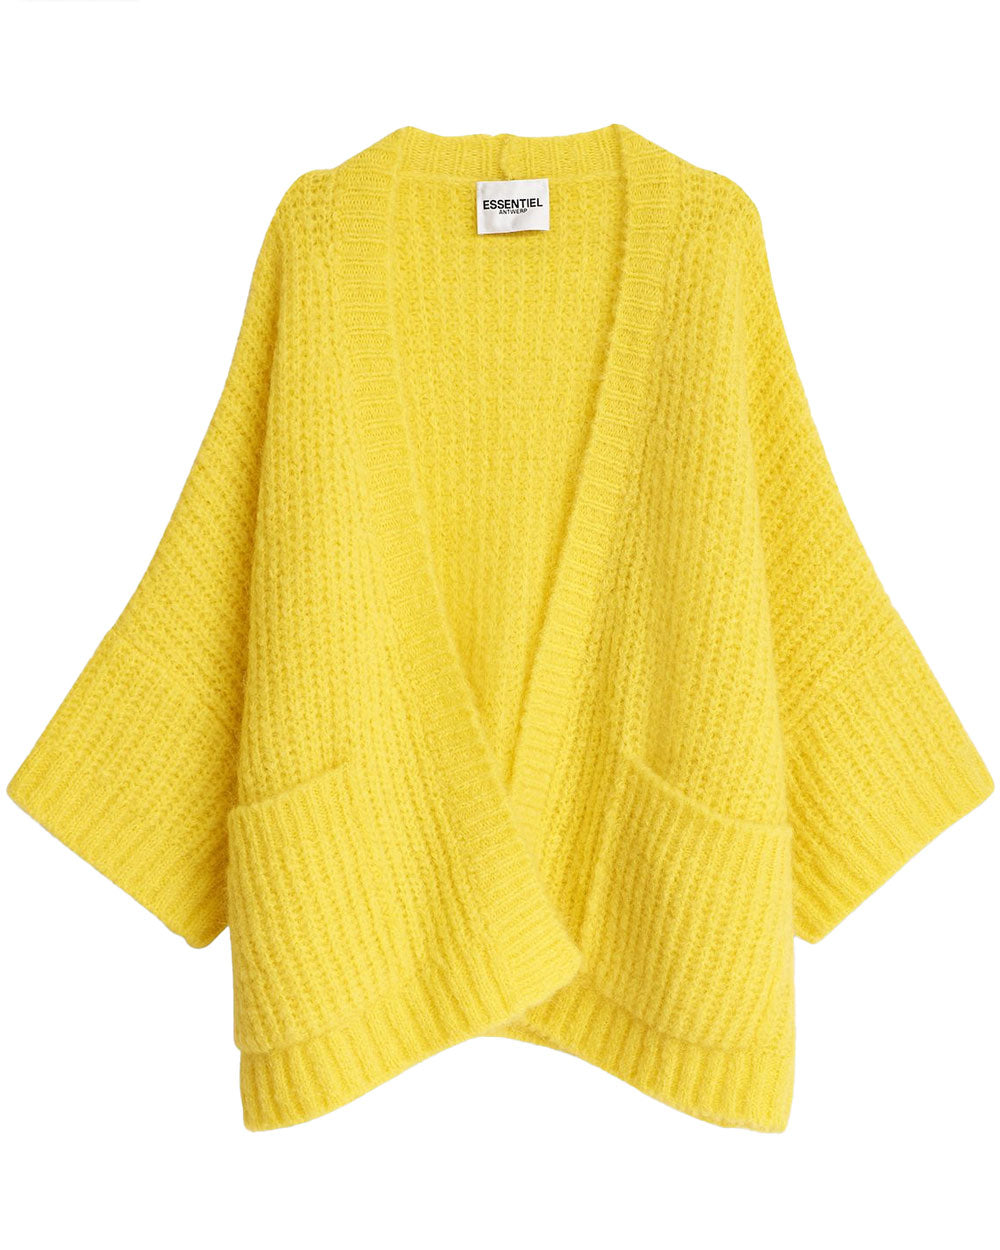 Clear Yellow Castrid Oversized Knit Cardigan